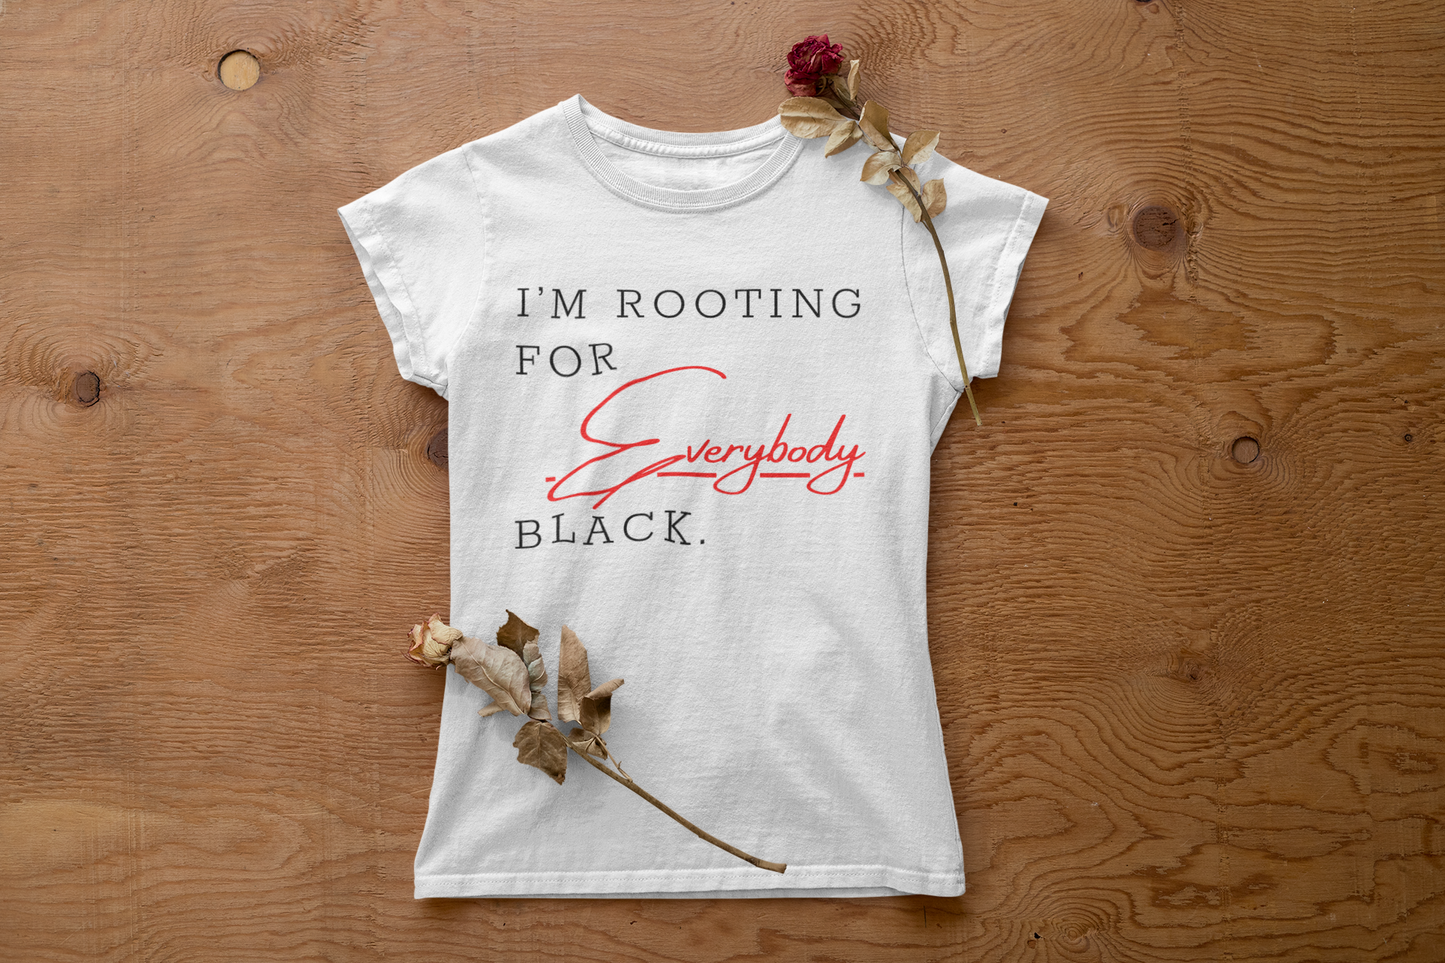 I’m Rooting for Everybody Black Short Sleeved Tee.